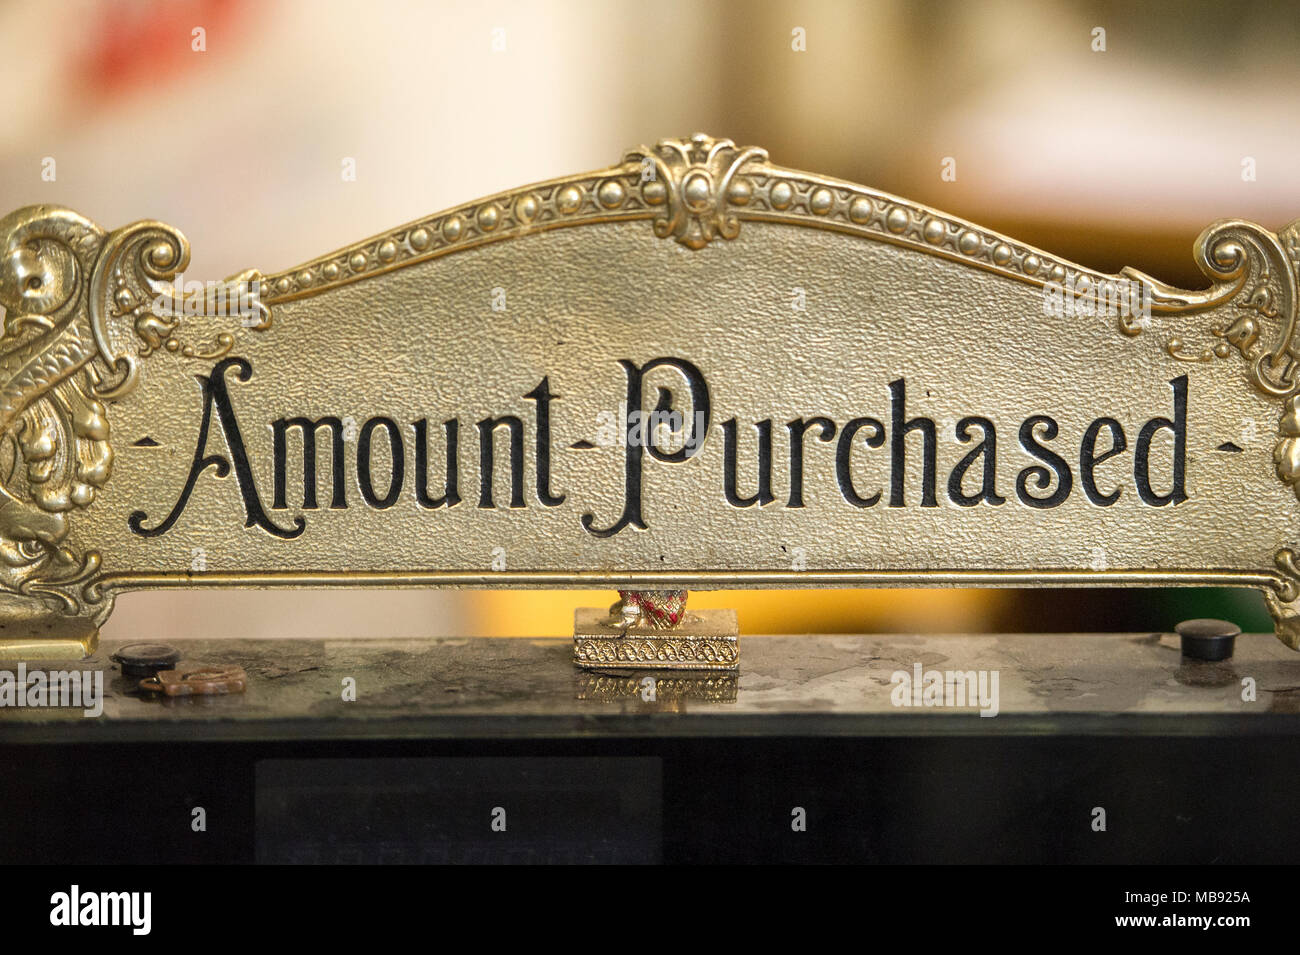 Amount purchased sign on old cash register. Stock Photo